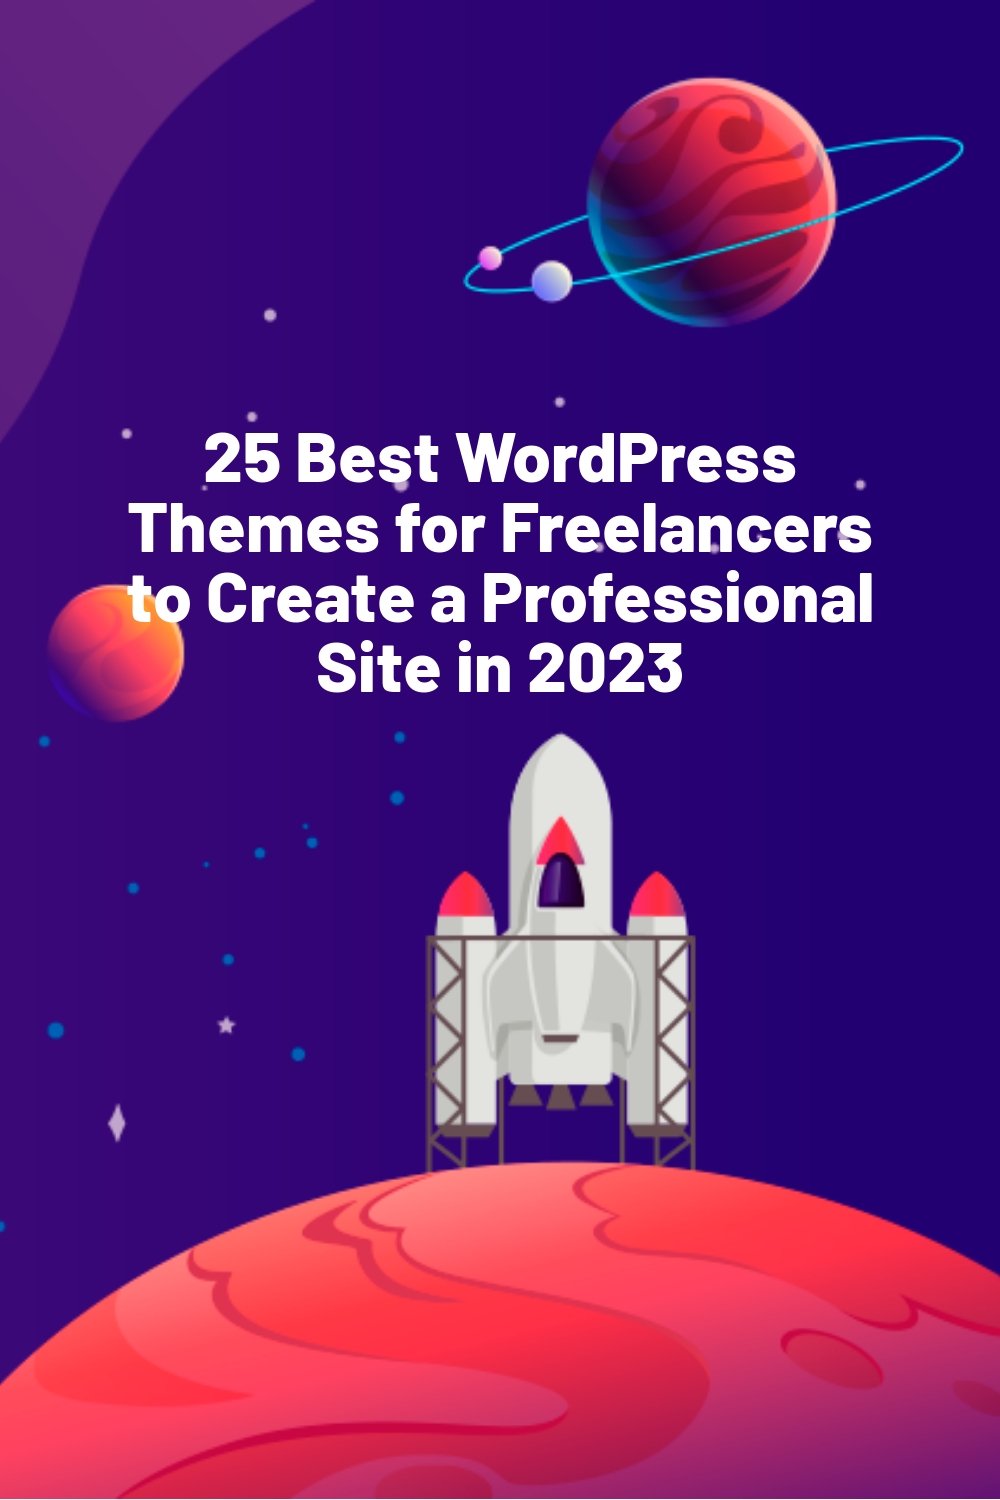 25 Best WordPress Themes for Freelancers to Create a Professional Site in 2023